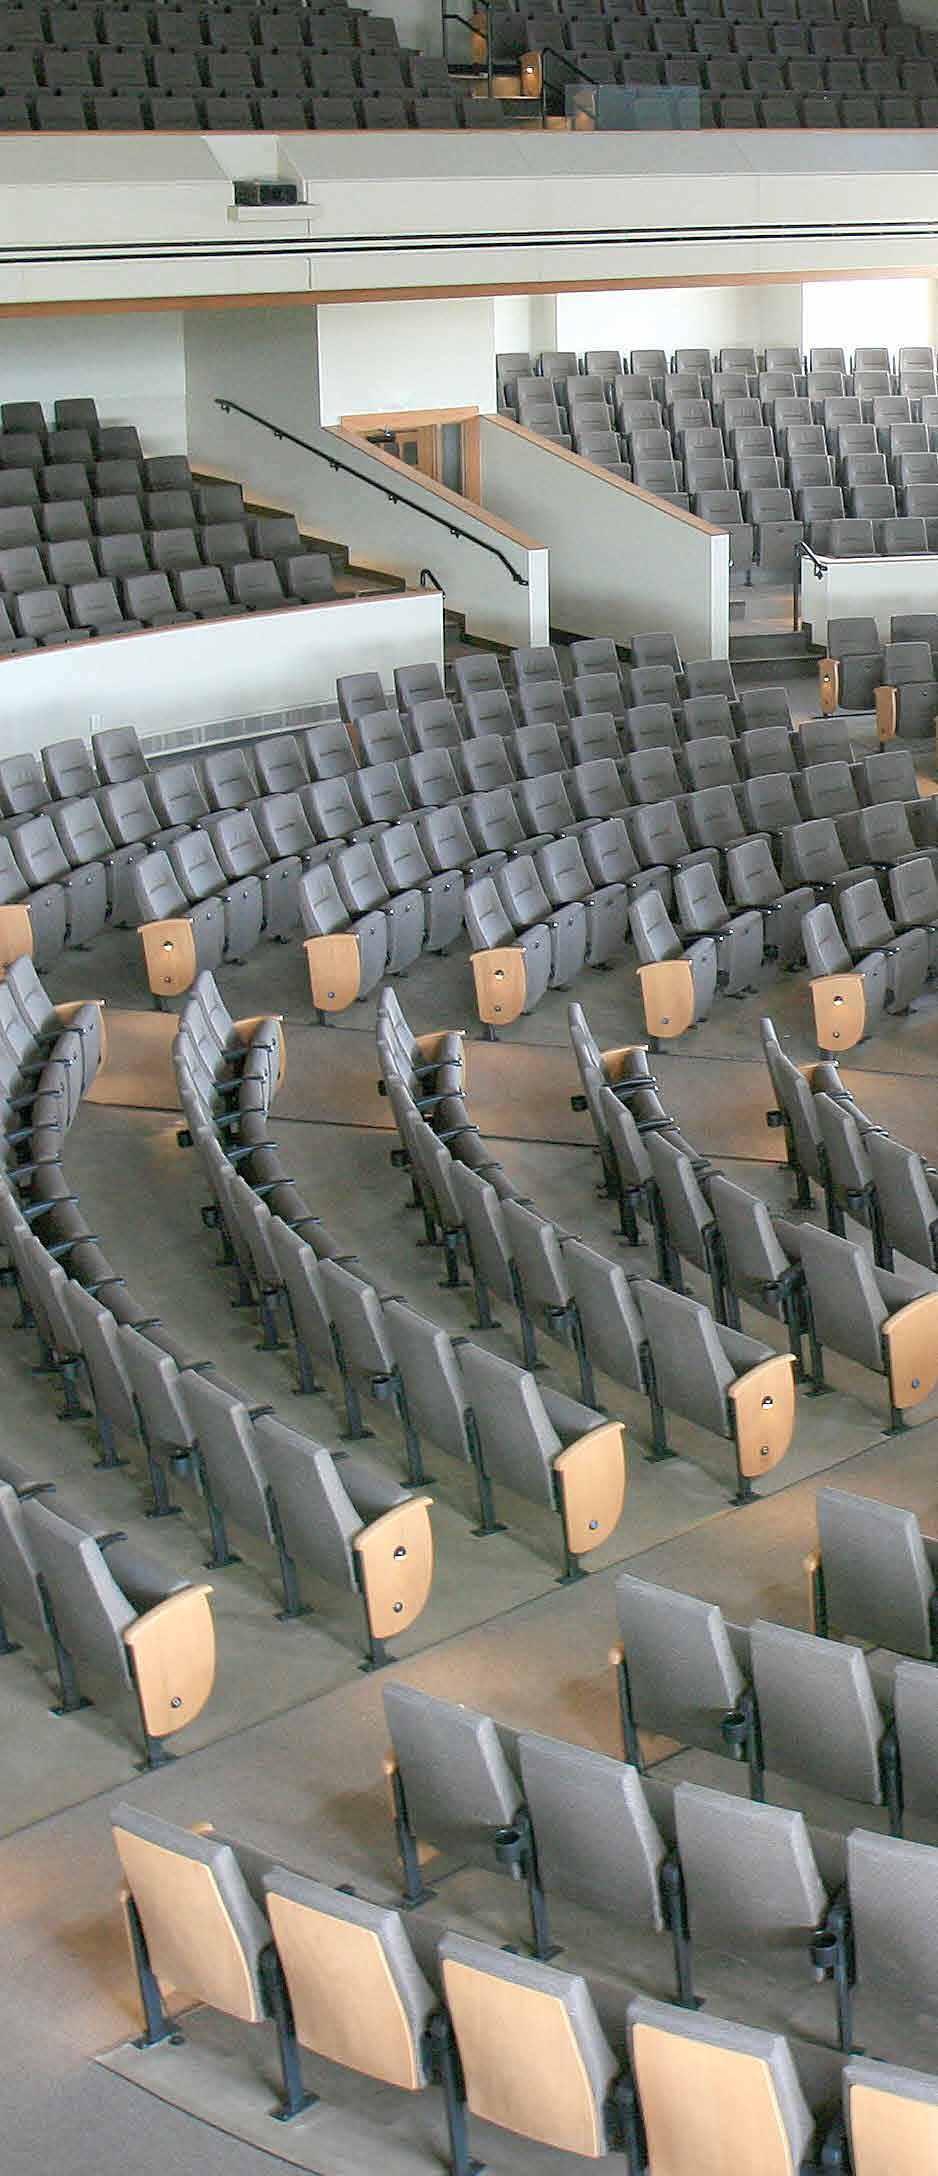 The Sauder Worship Seating Advantage We create a combination of worship seating styles from pews on the main floor, chairs in the choir loft, to auditorium seating in the balcony.